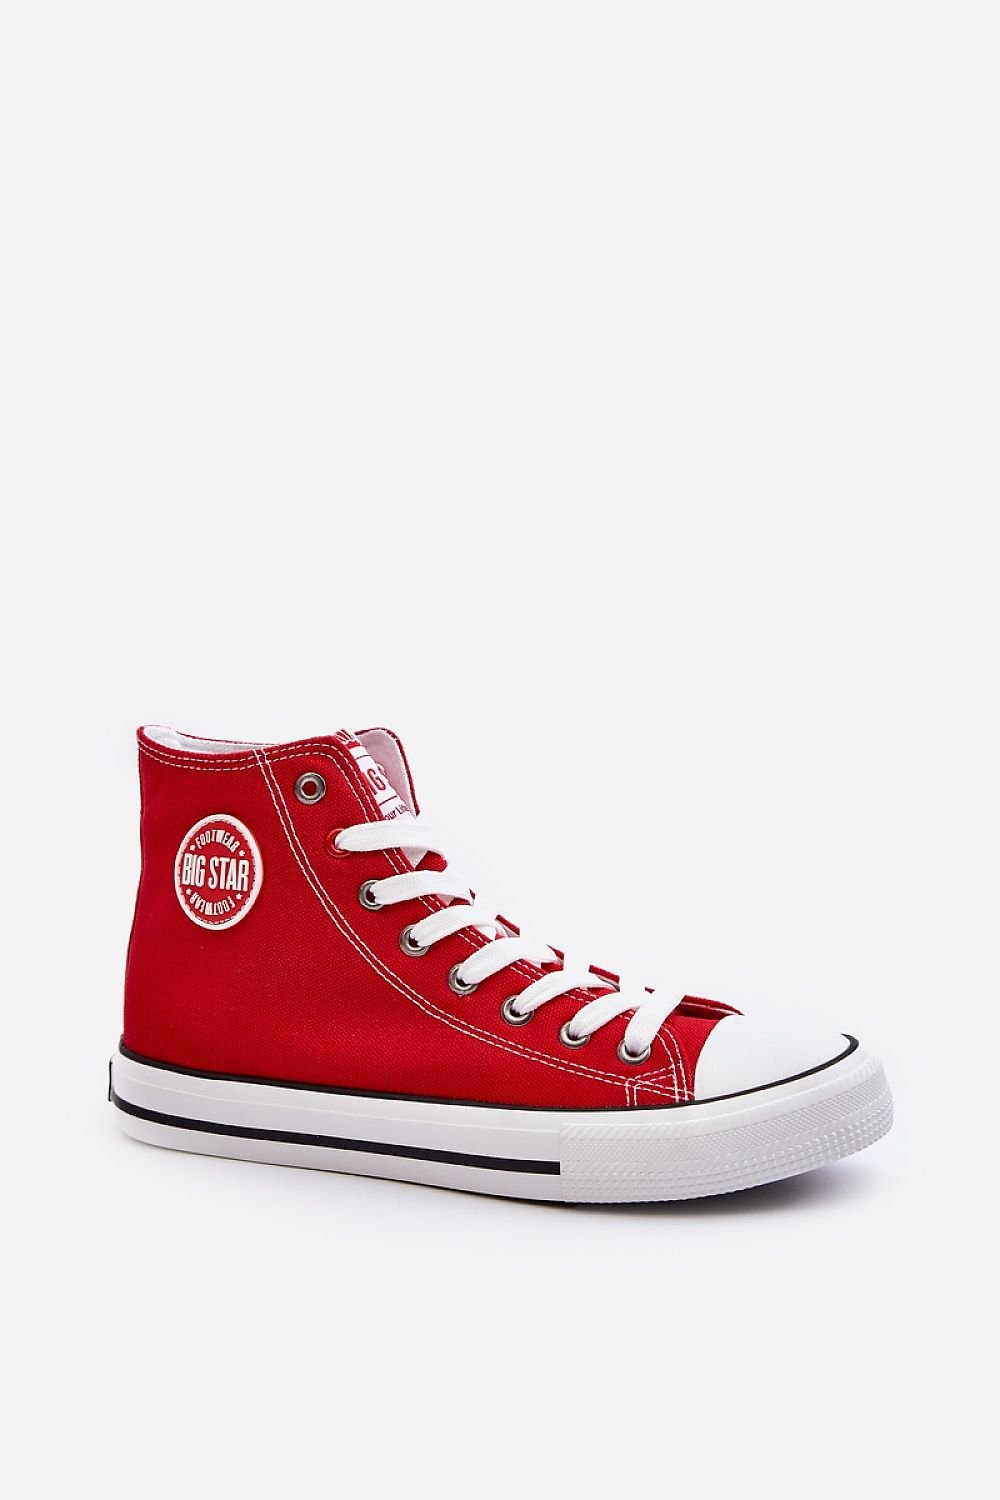 Classic High-Top Red Canvas Sneakers